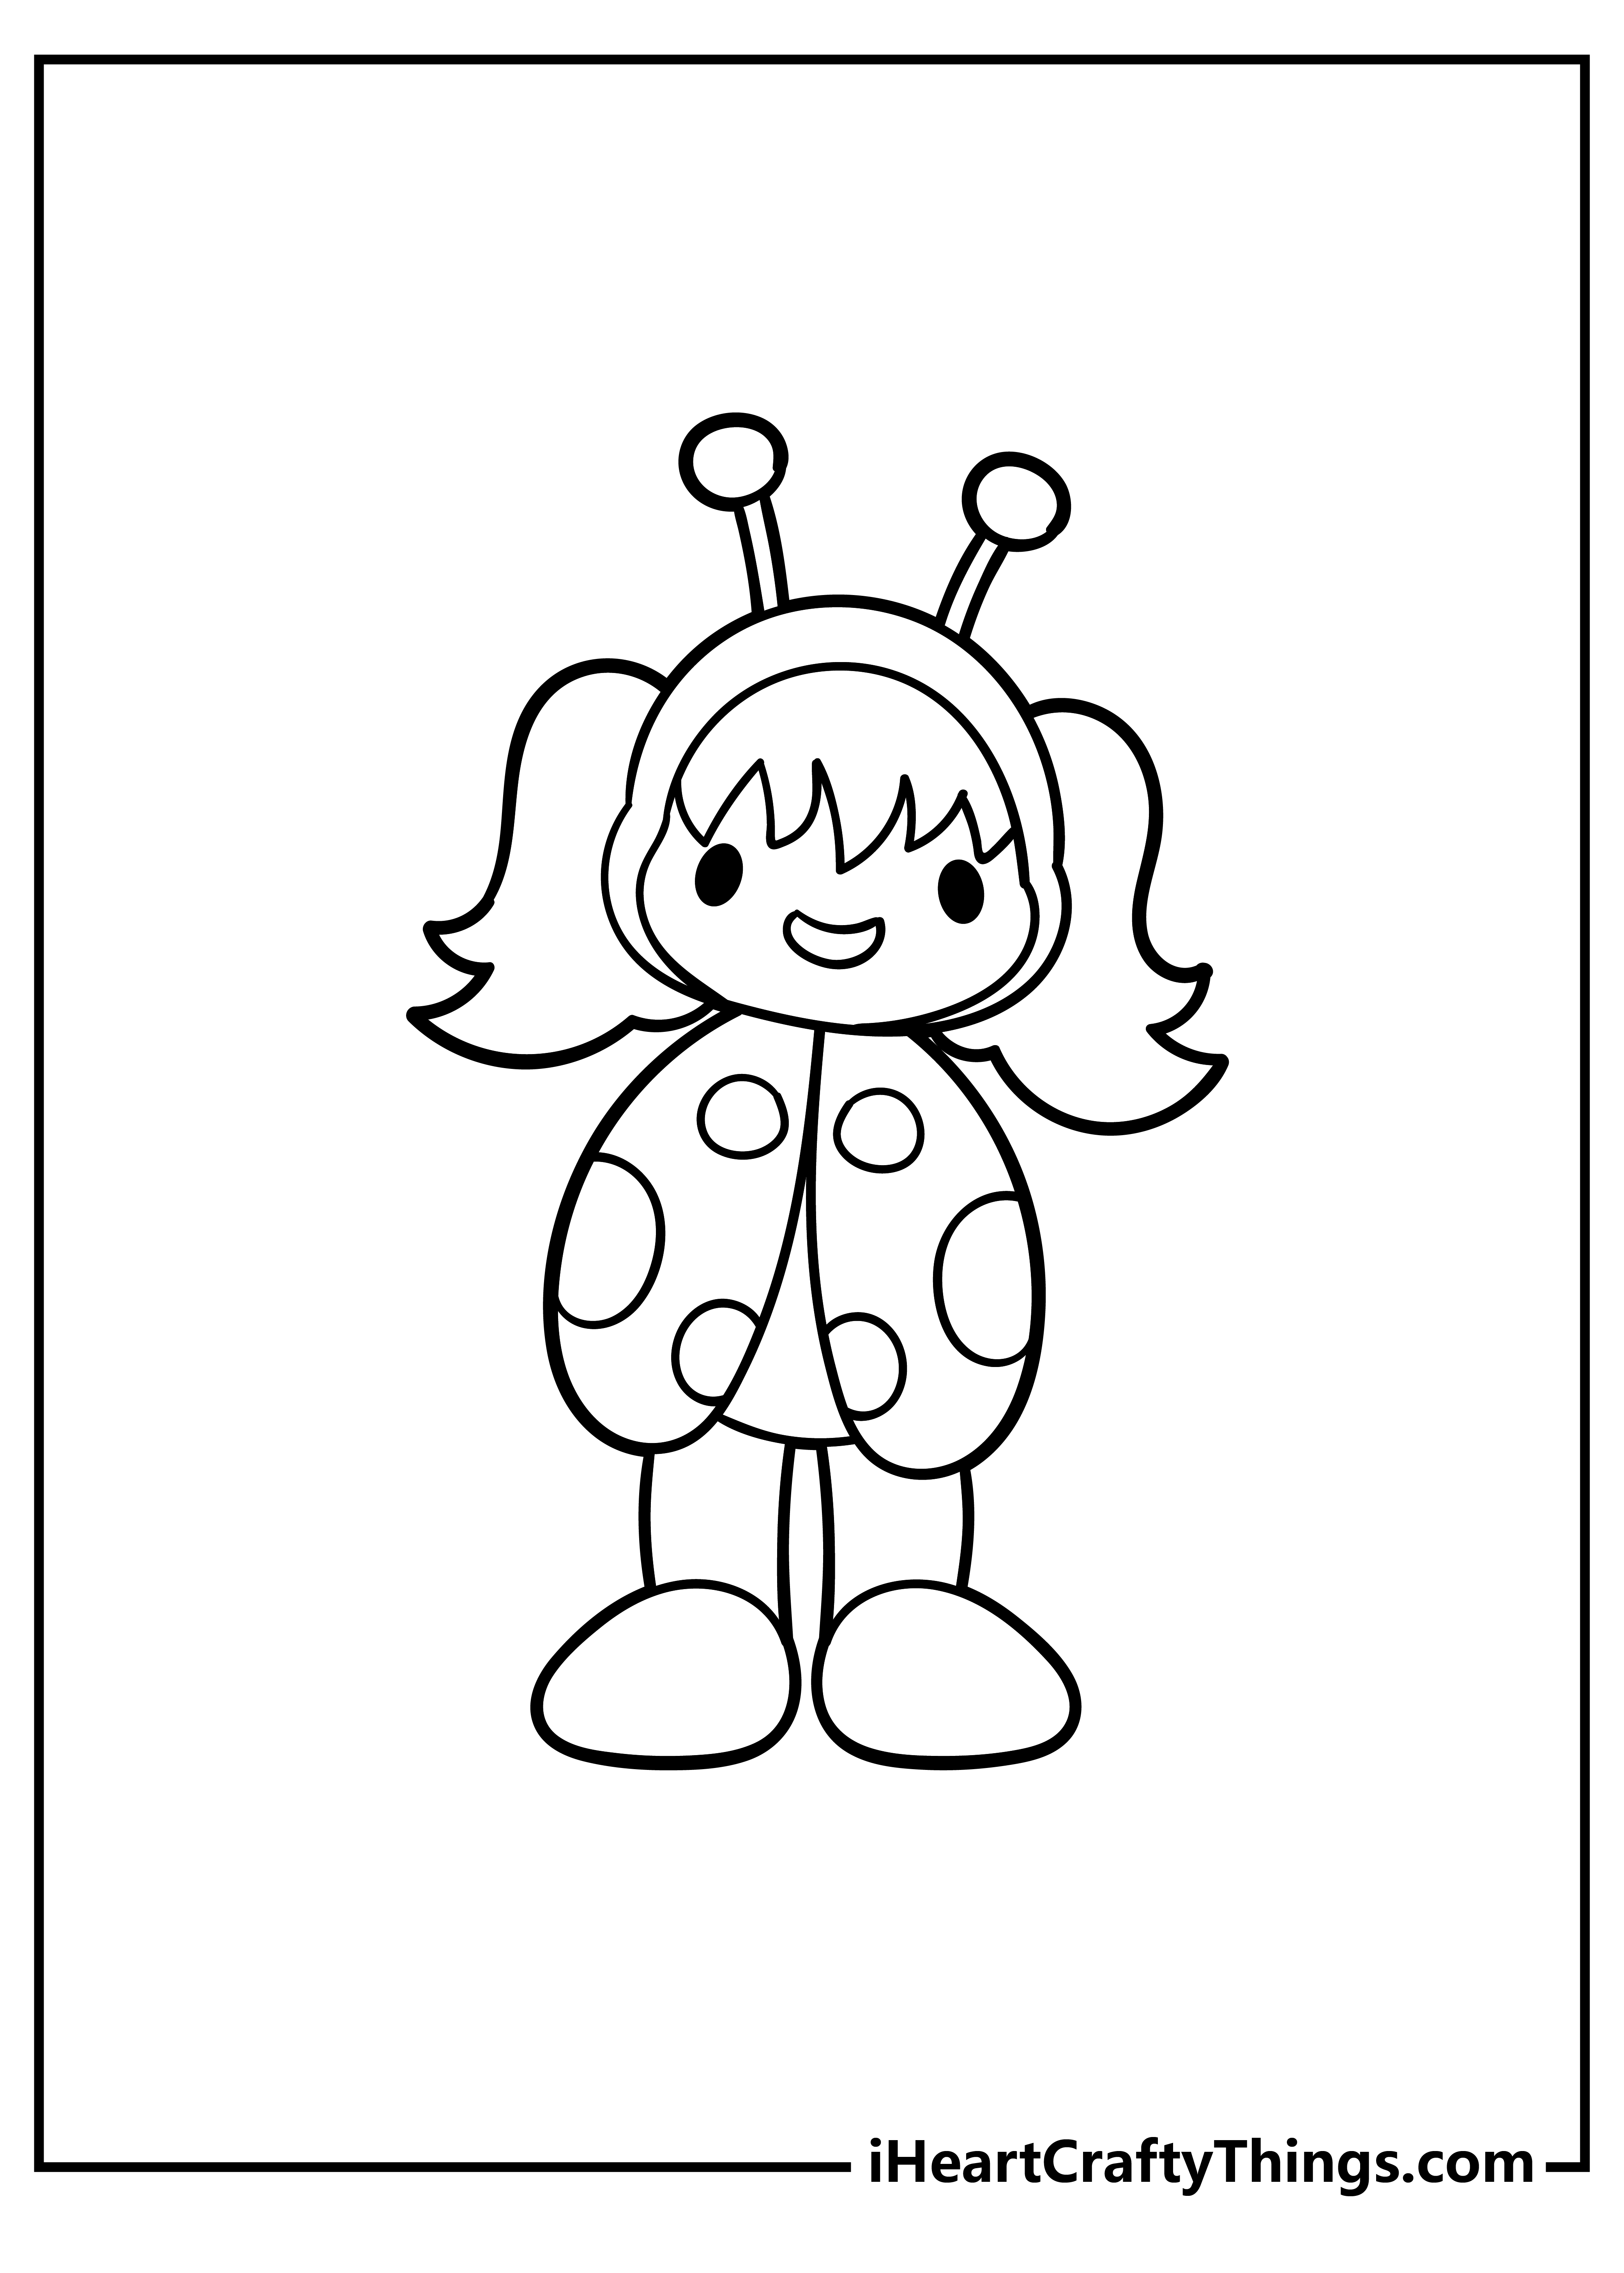 Coloring Pages For Girls free download